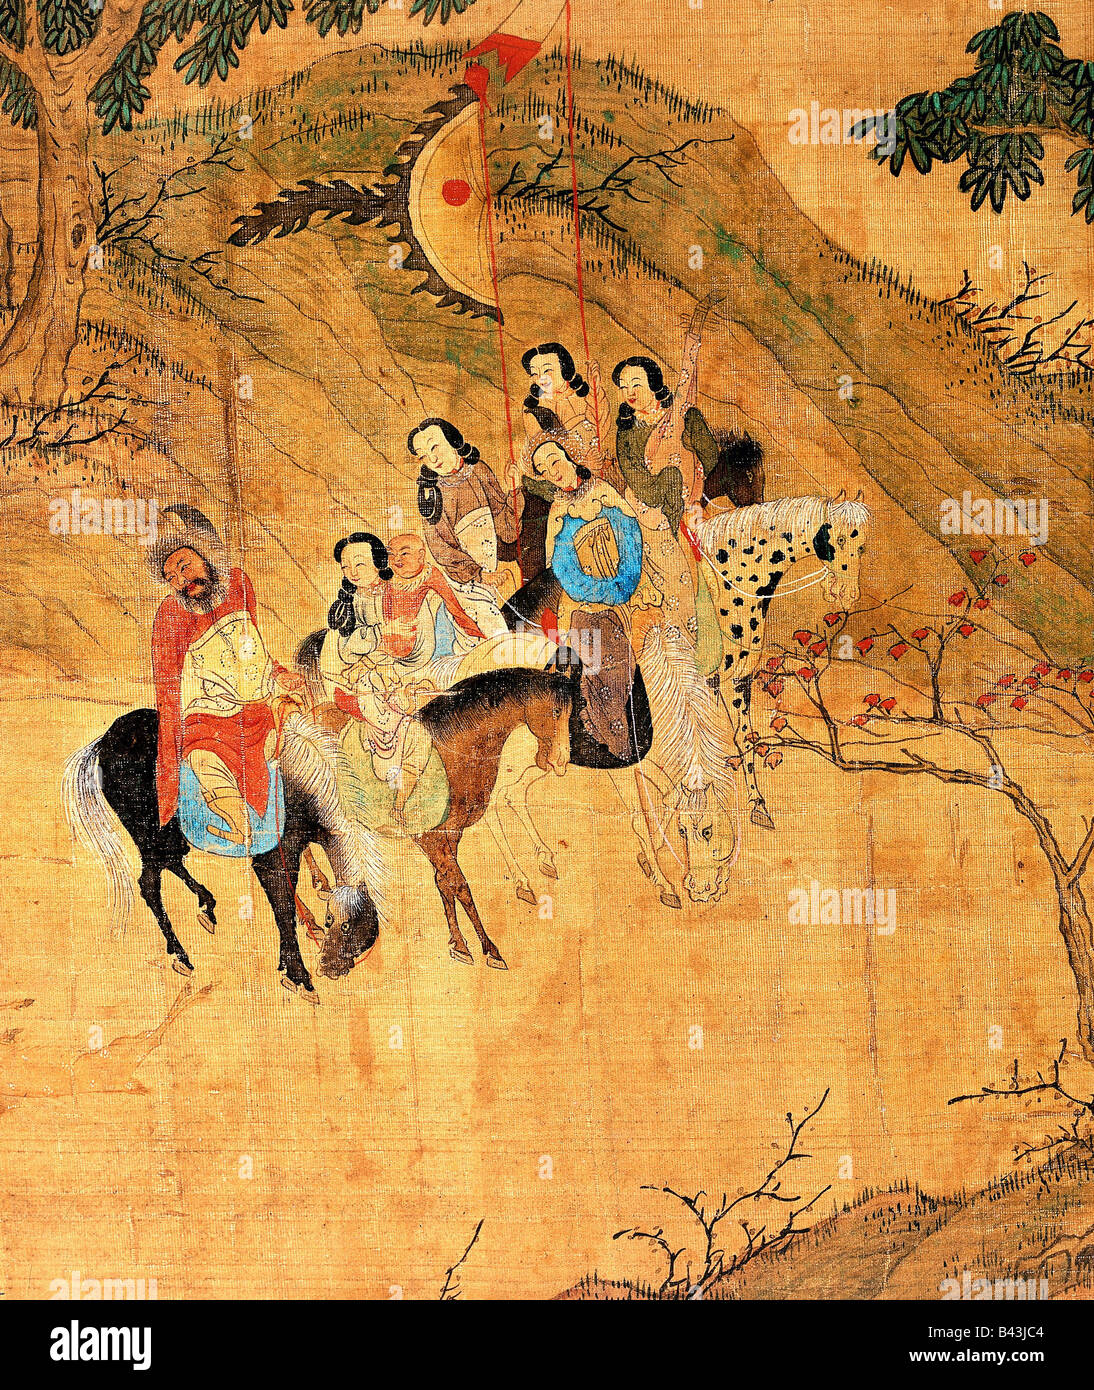 fine arts - China, Dshau Tse Nag (1265 - 1307), painting, 'Emperor Tomor hunting', silk painting, detail, Yuan Dynasty, circa 1300 AD, private collection, , Artist's Copyright has not to be cleared Stock Photo